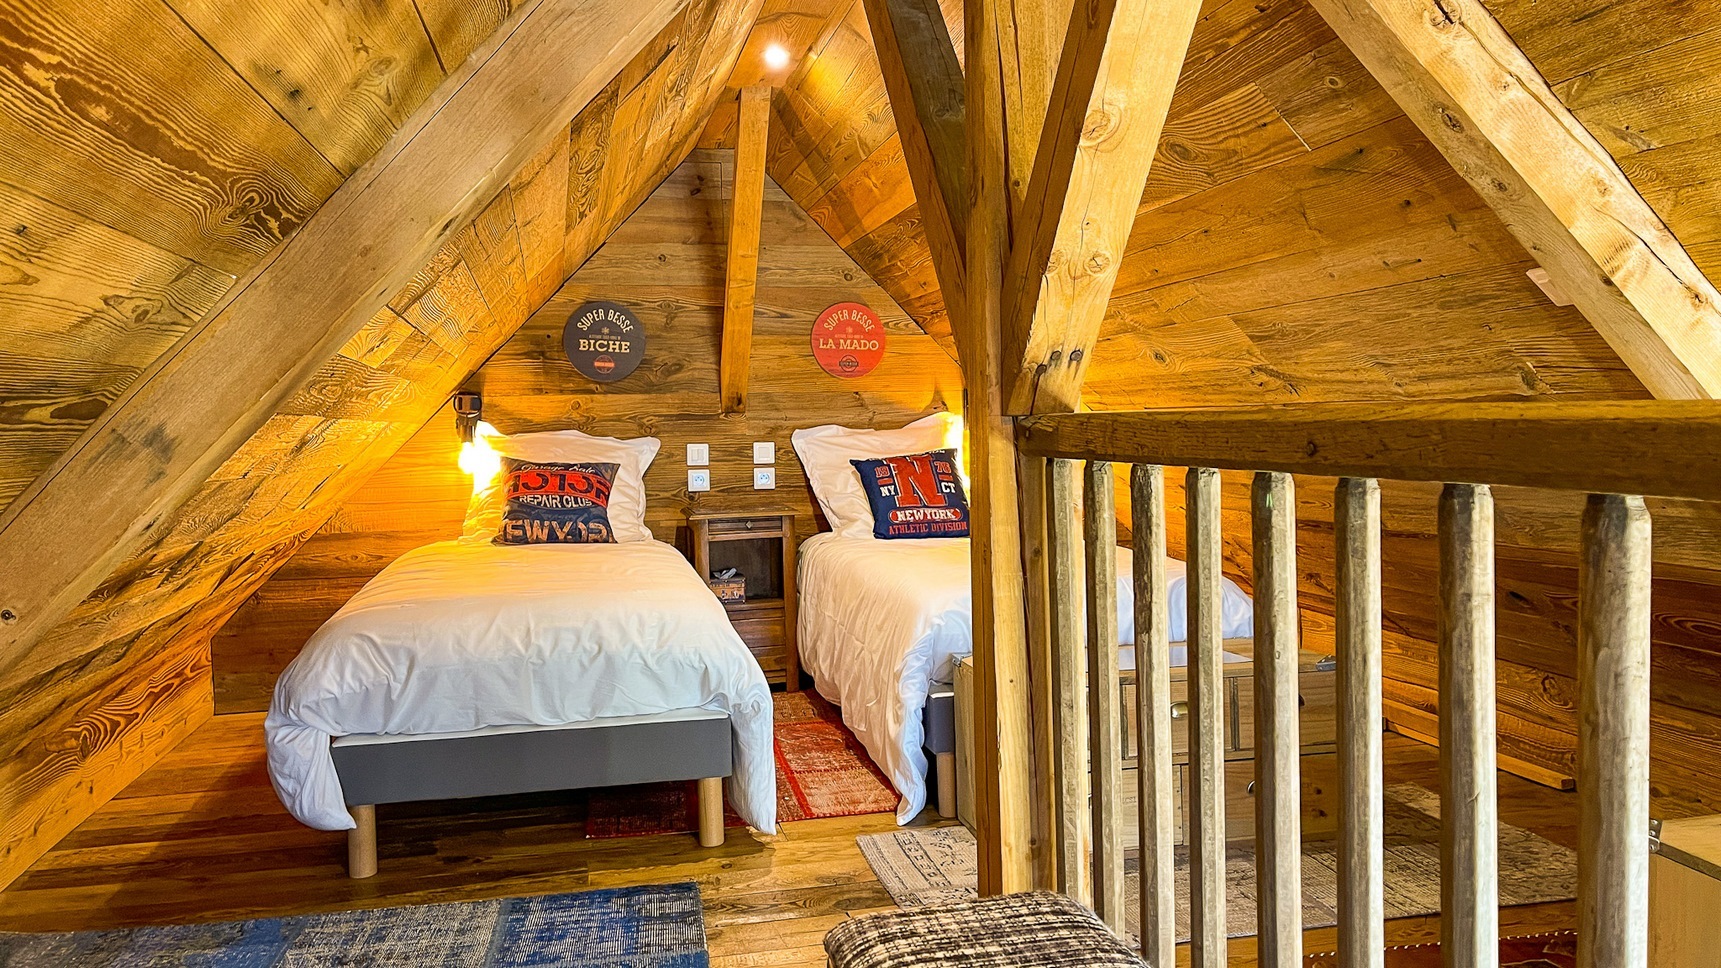 Chalet Sancy, the pretty wooden bedroom and its Mezzanine beds of the Anorak Sancy chalet